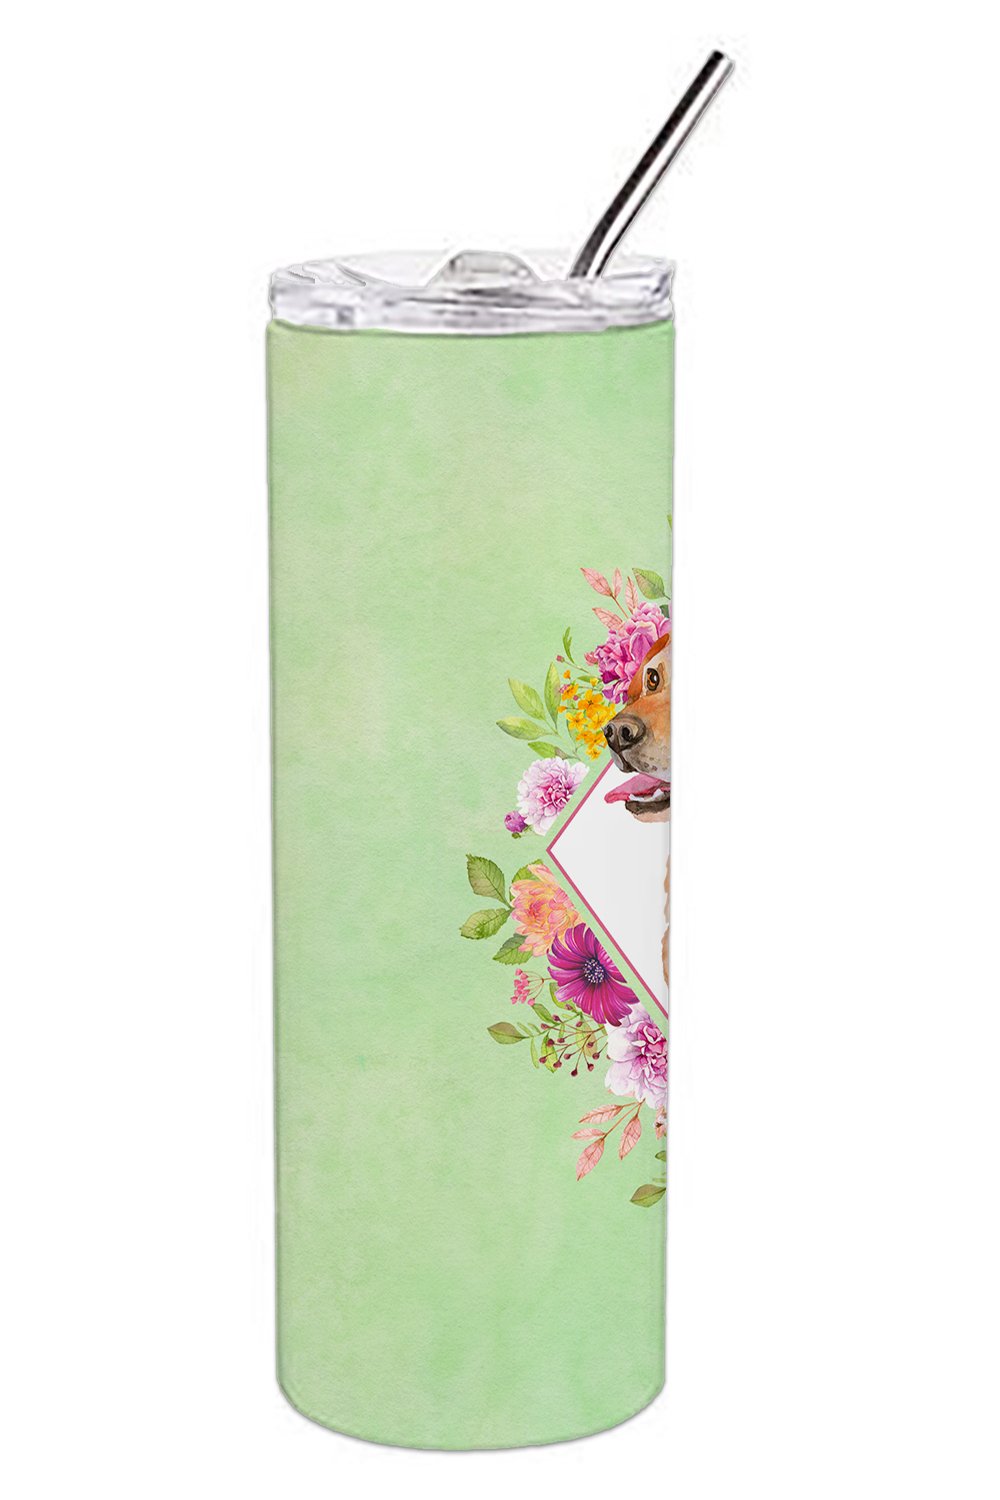 Yellow Labrador Retriever Green Flowers Double Walled Stainless Steel 20 oz Skinny Tumbler CK4318TBL20 by Caroline's Treasures